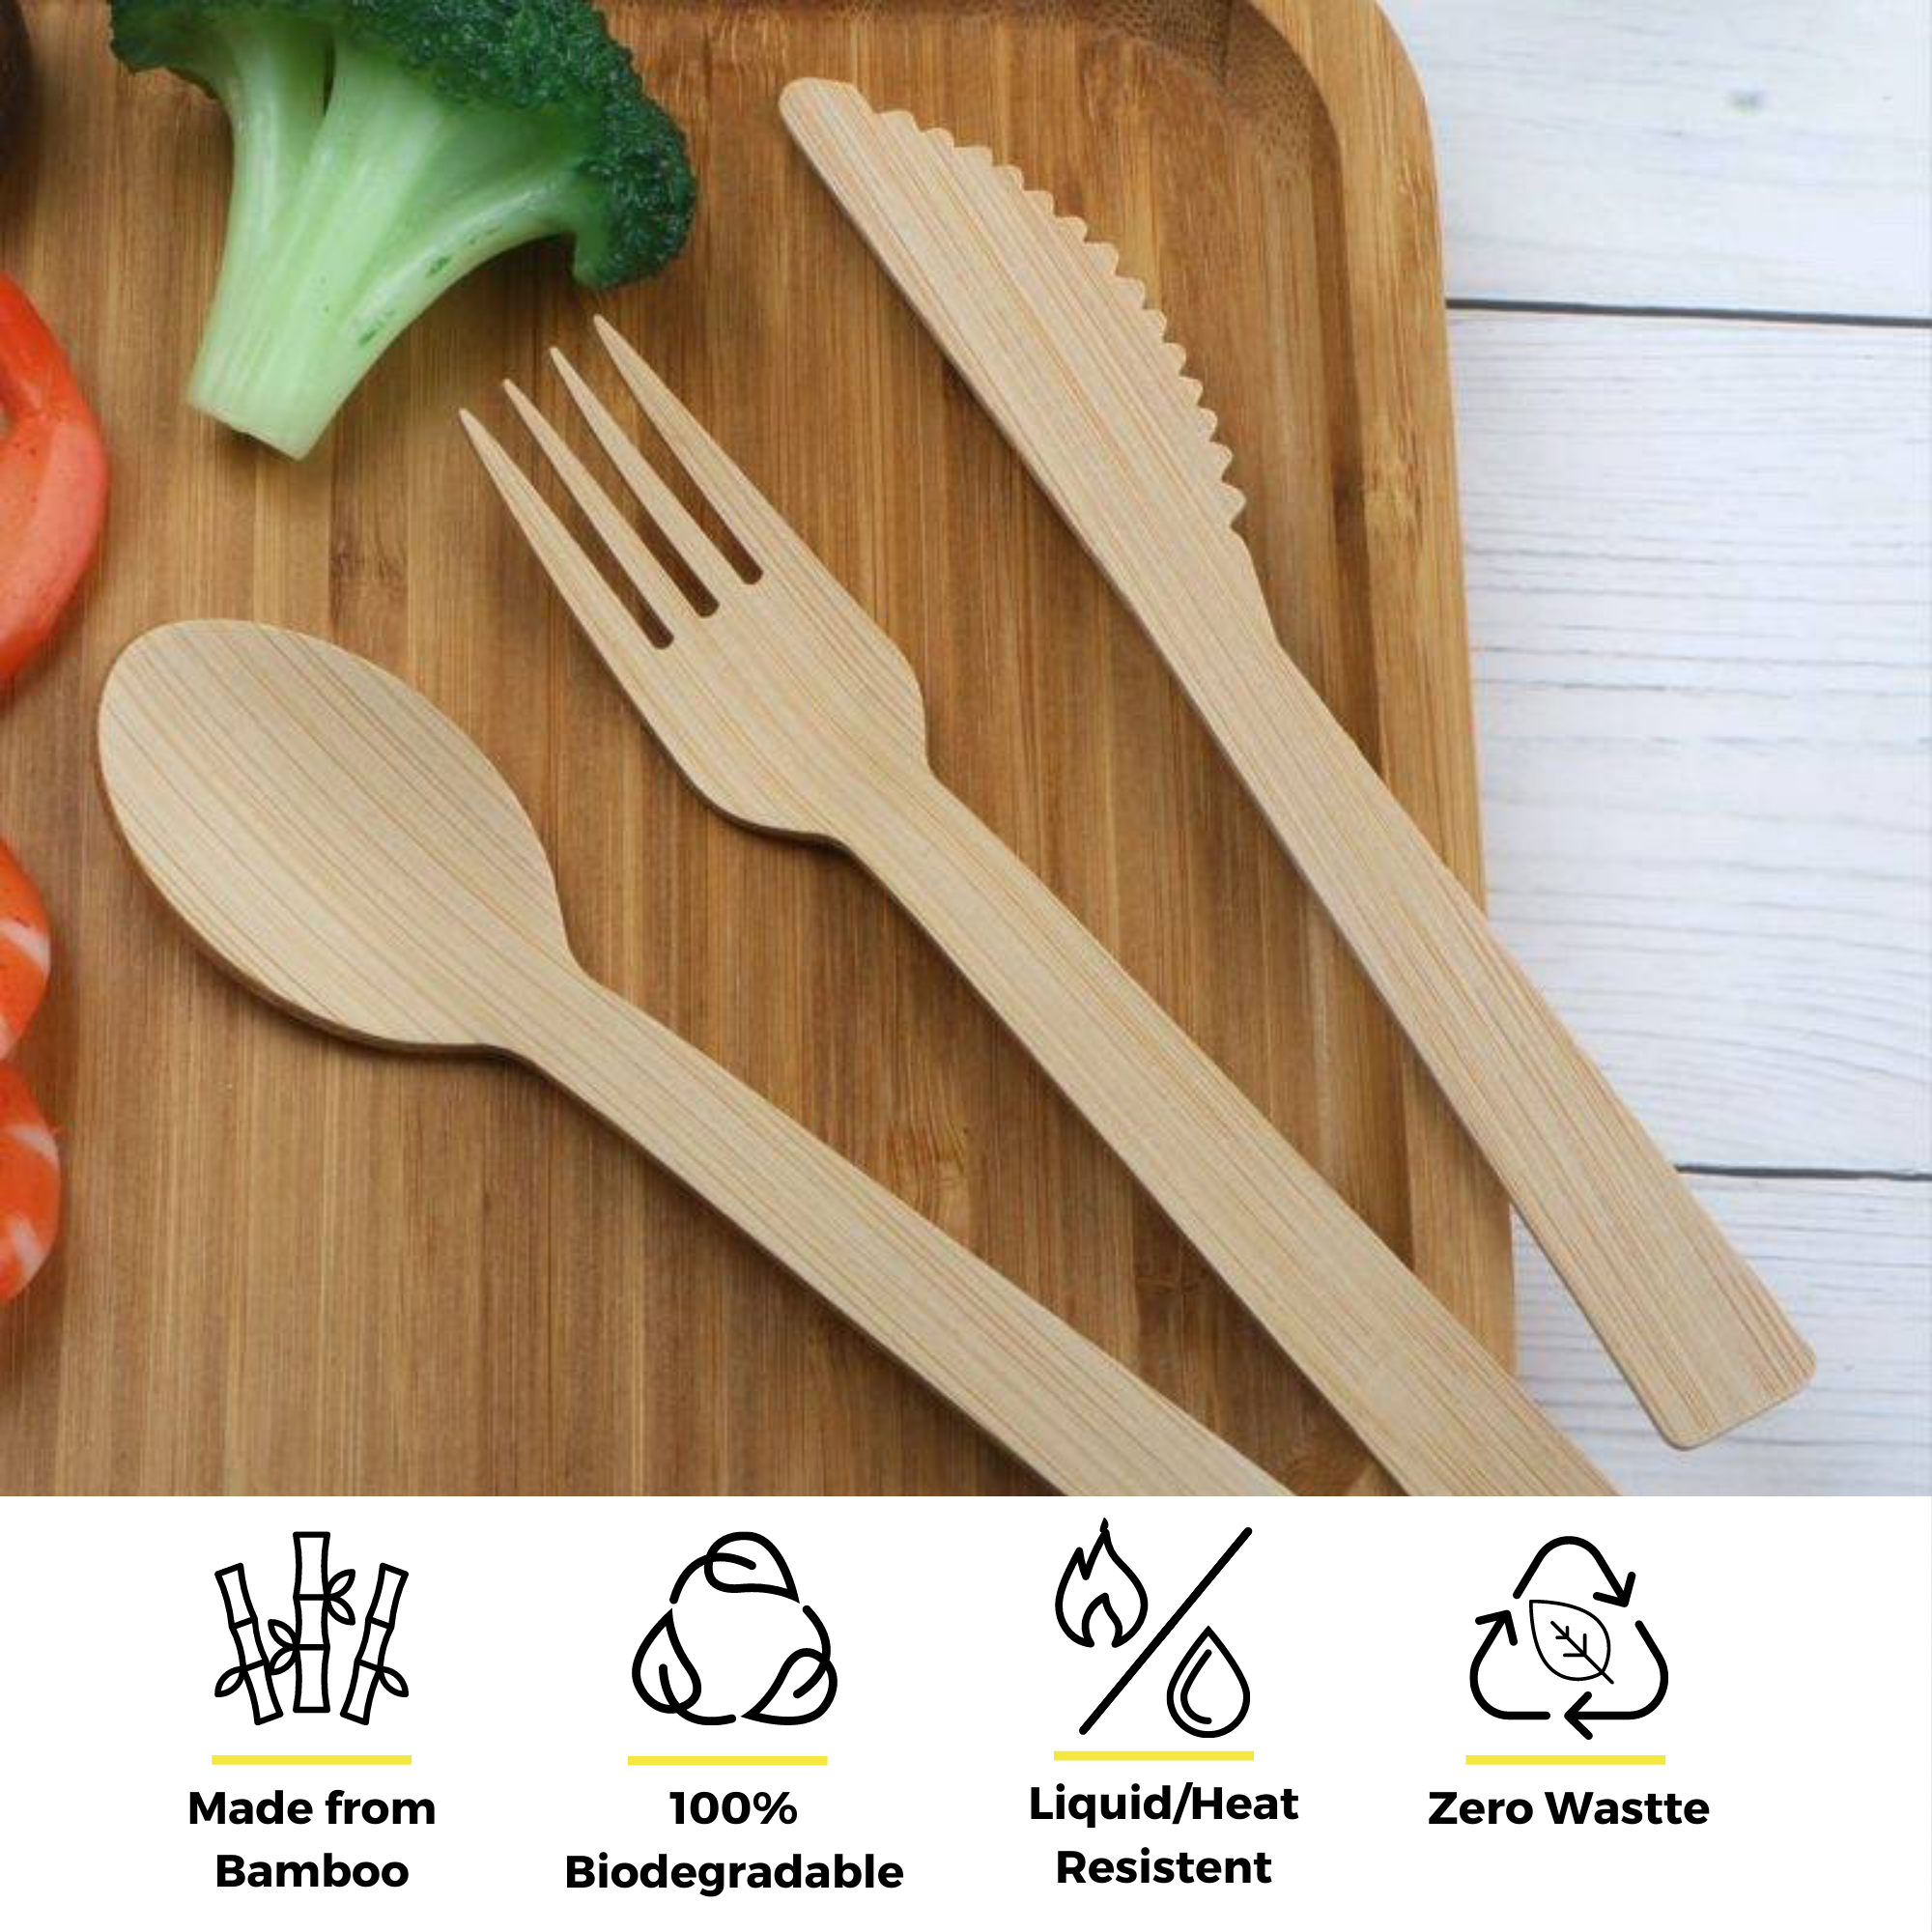 Environmentally-friendly bamboo cutlery set by Holy City Straw Co. displayed on a bamboo cutting board, with a fork, knife, and spoon visible next to slices of fresh broccoli and tomato. Icons below emphasize the utensils' features: Made from Bamboo, 100% Biodegradable, Liquid/Heat Resistant, and Zero Waste